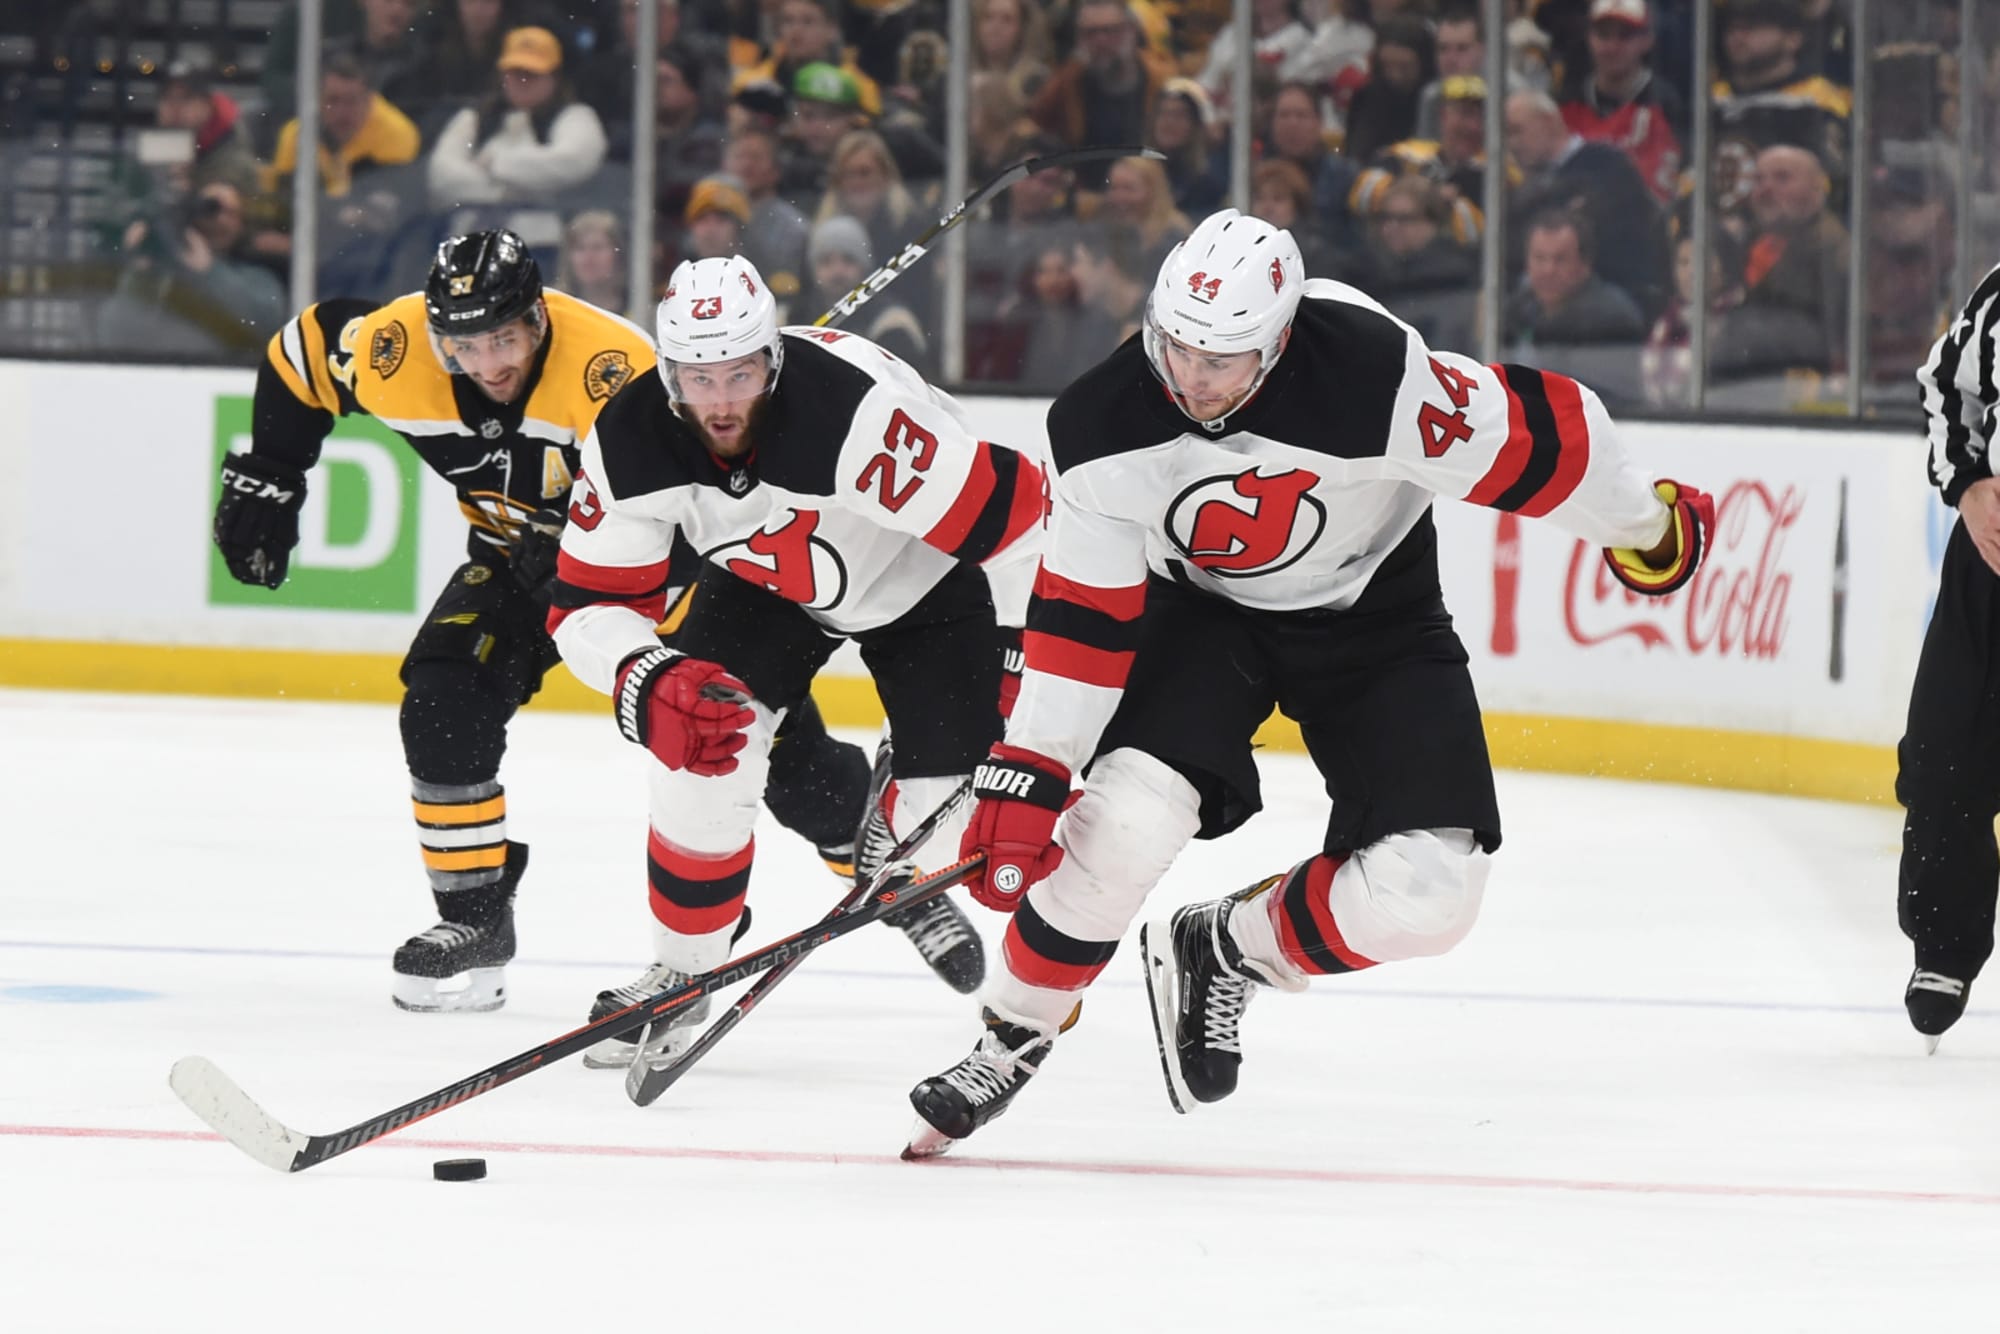 Boston Bruins acquire Marcus Johansson from the New Jersey Devils